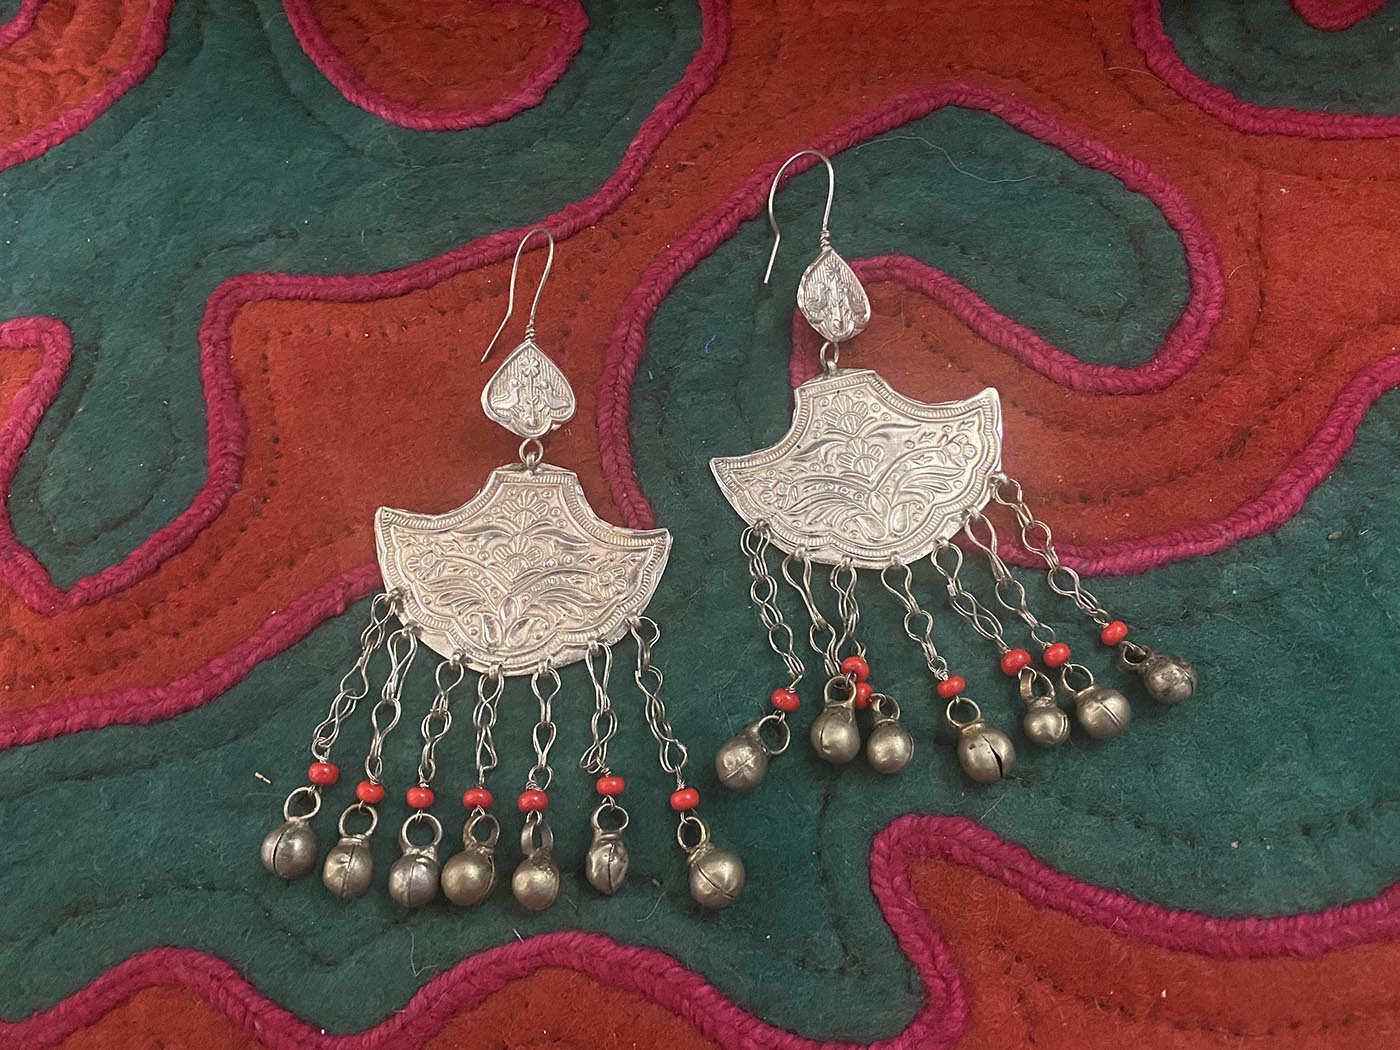 Traditional Earrings with local ornaments